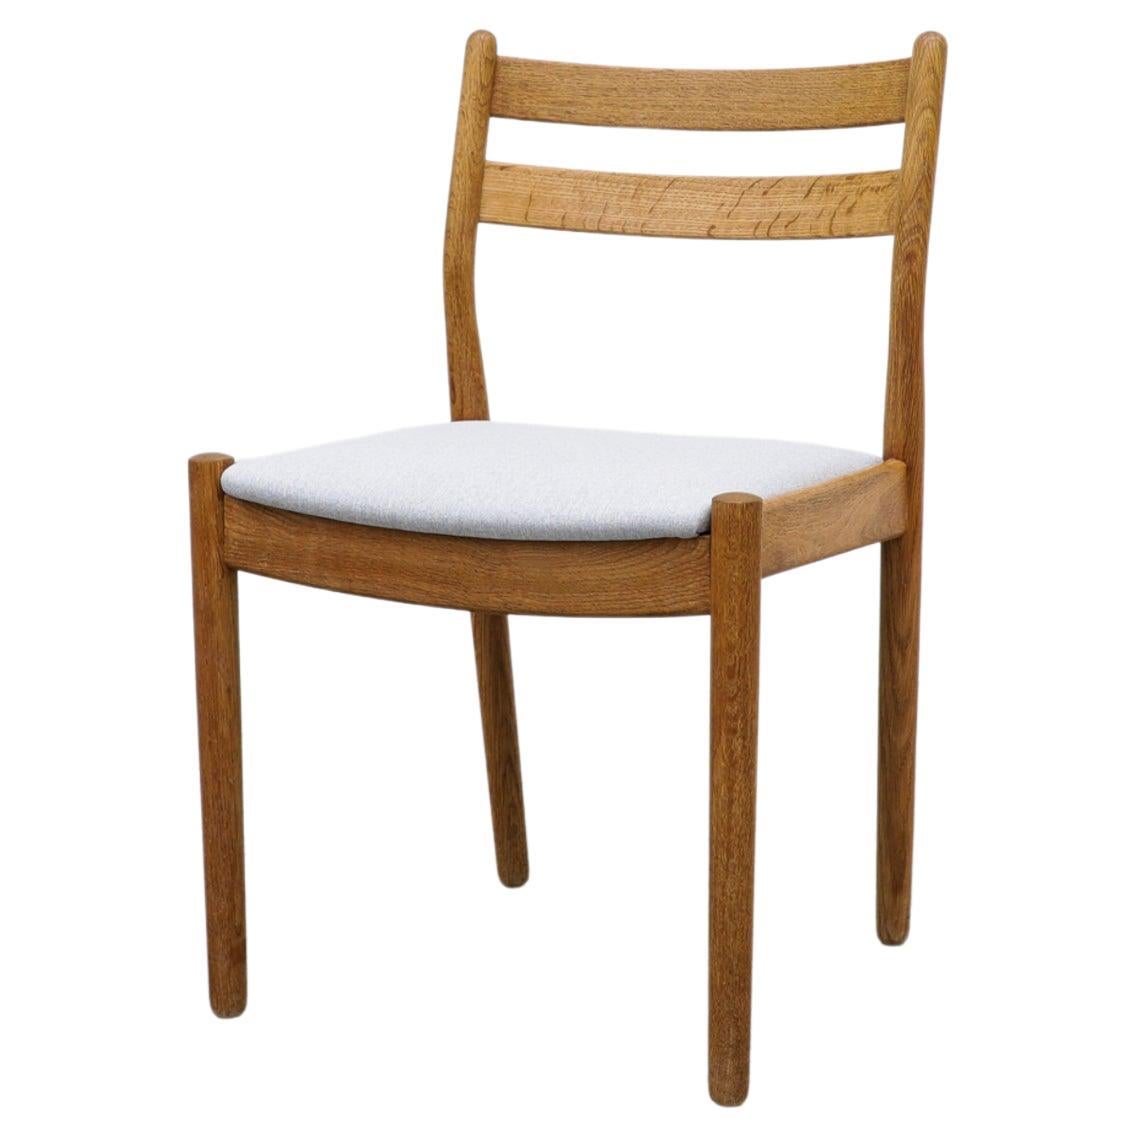 Midcentury Danish Oak Side Chair by Poul Volther w/ Light Blue Upholstered Seat  For Sale